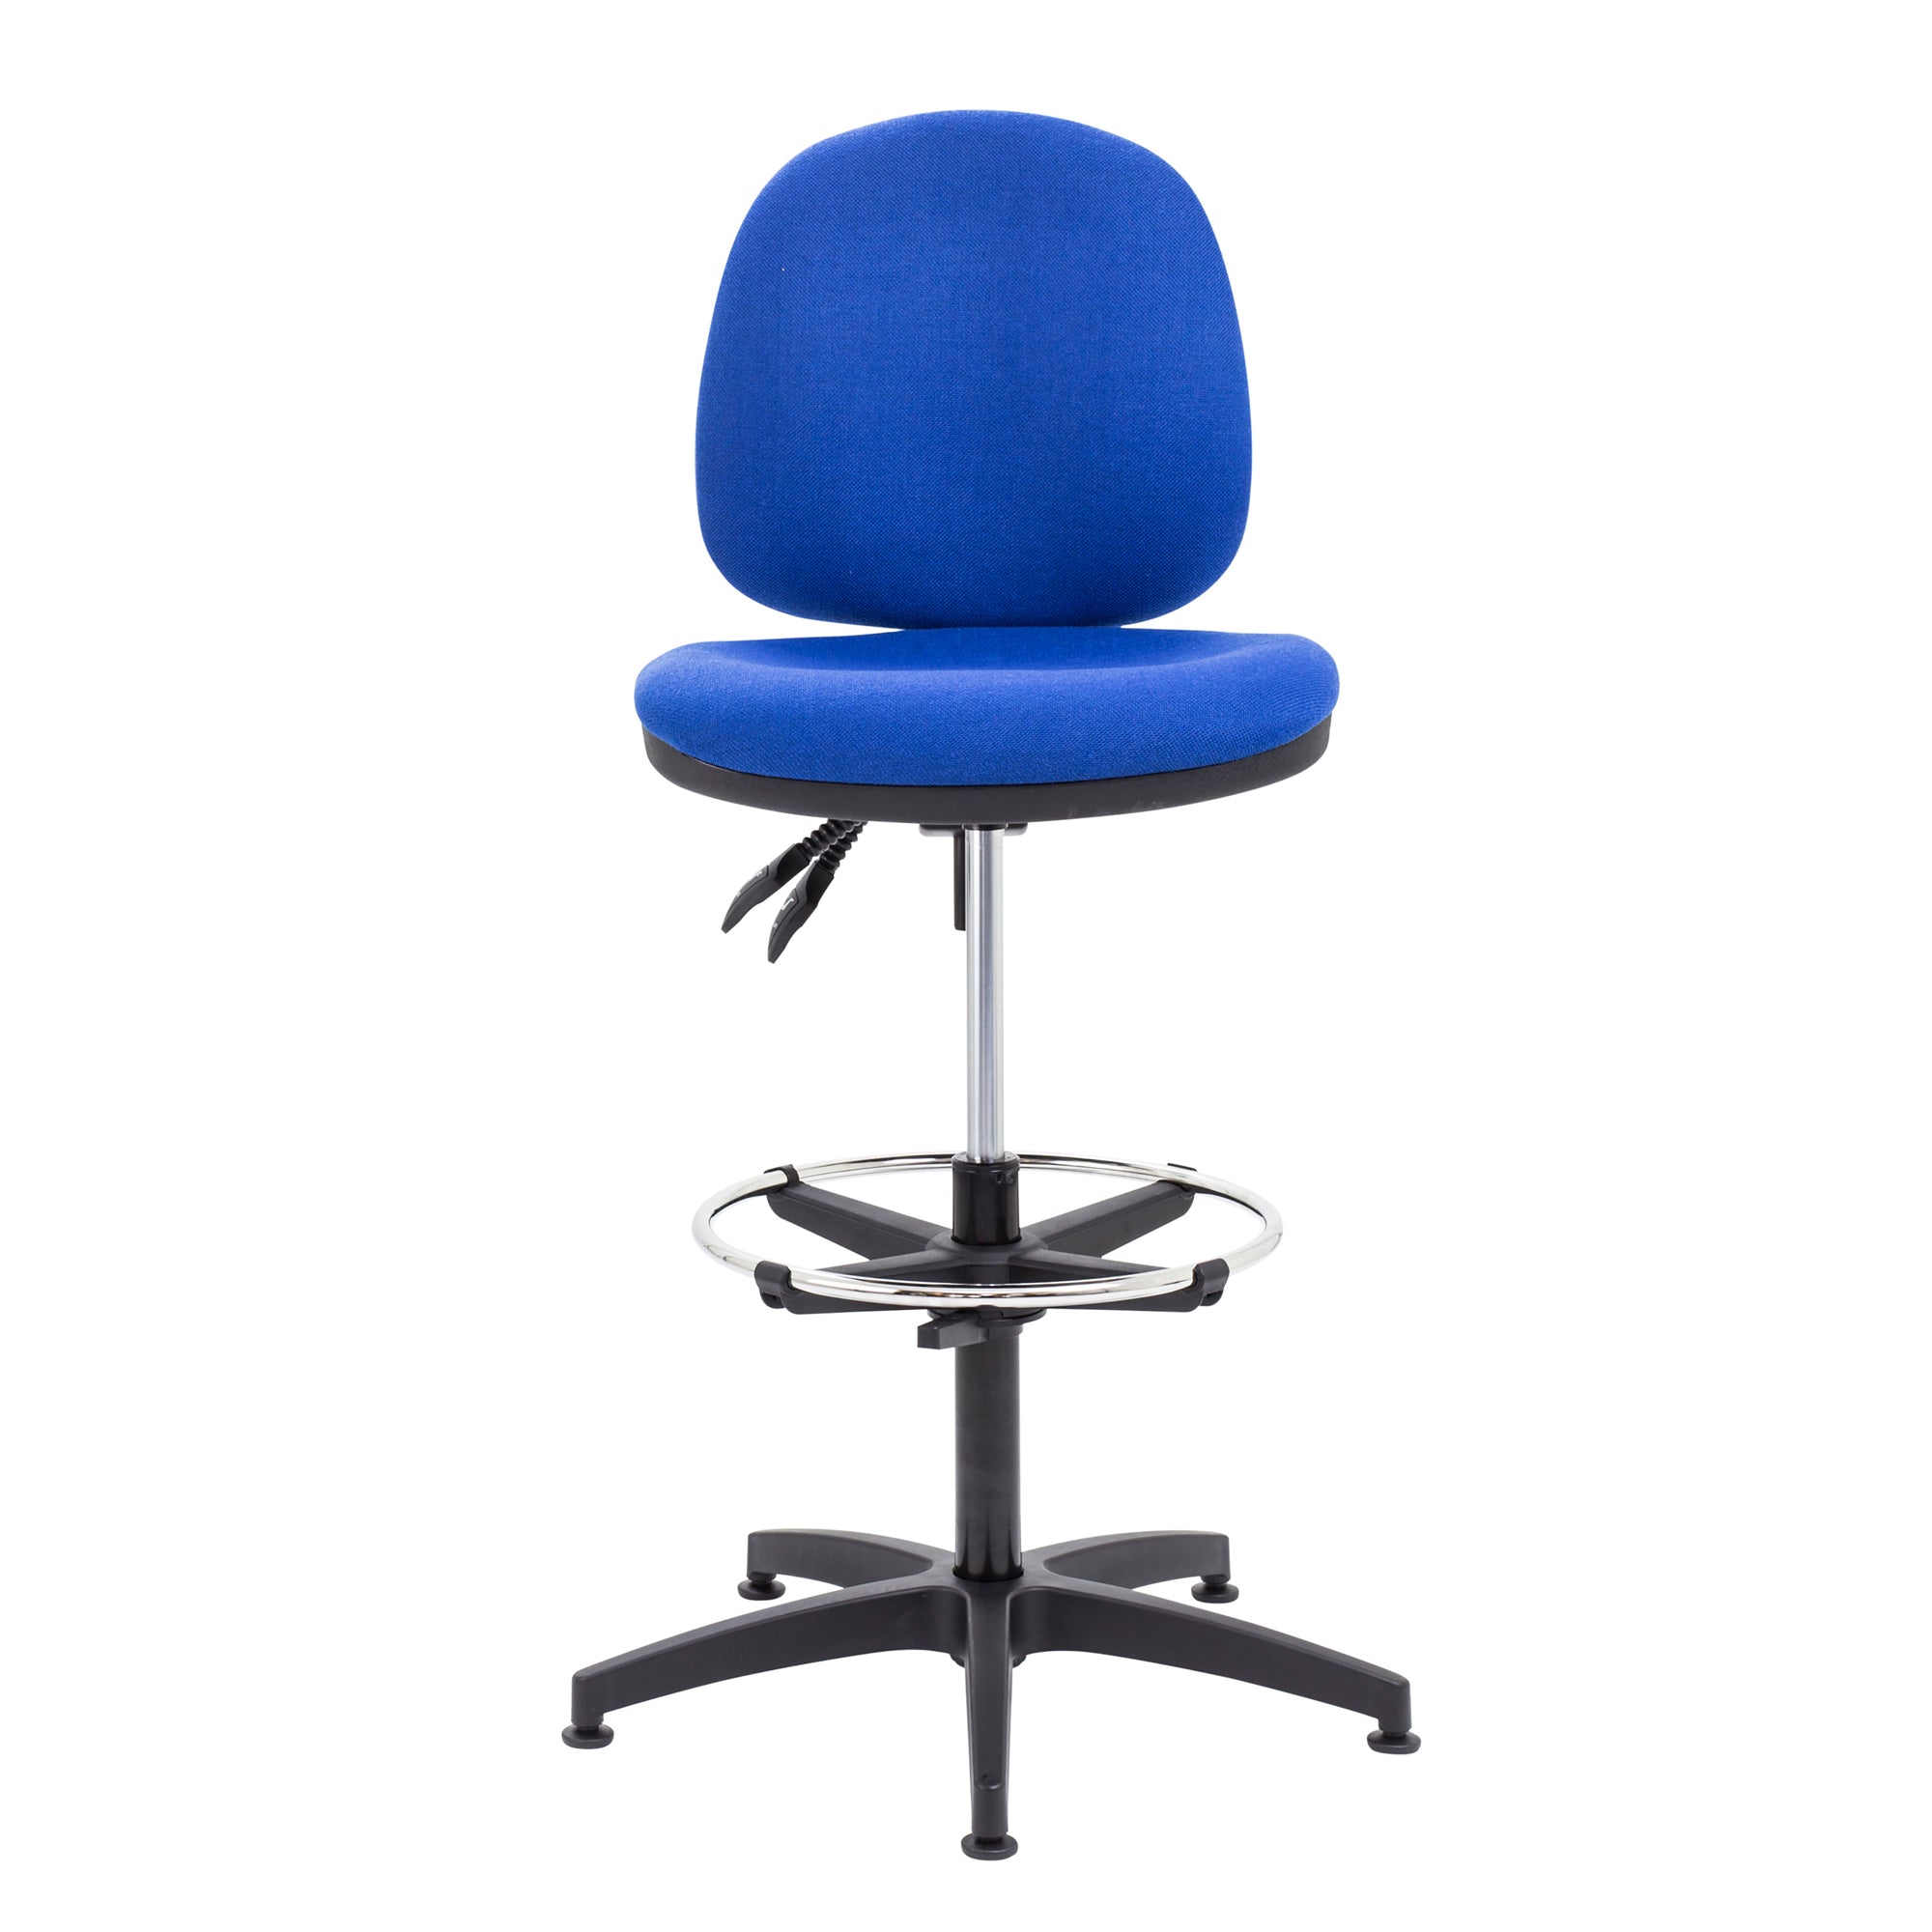 Concept Mid Back Chair with Draughtsman Kit